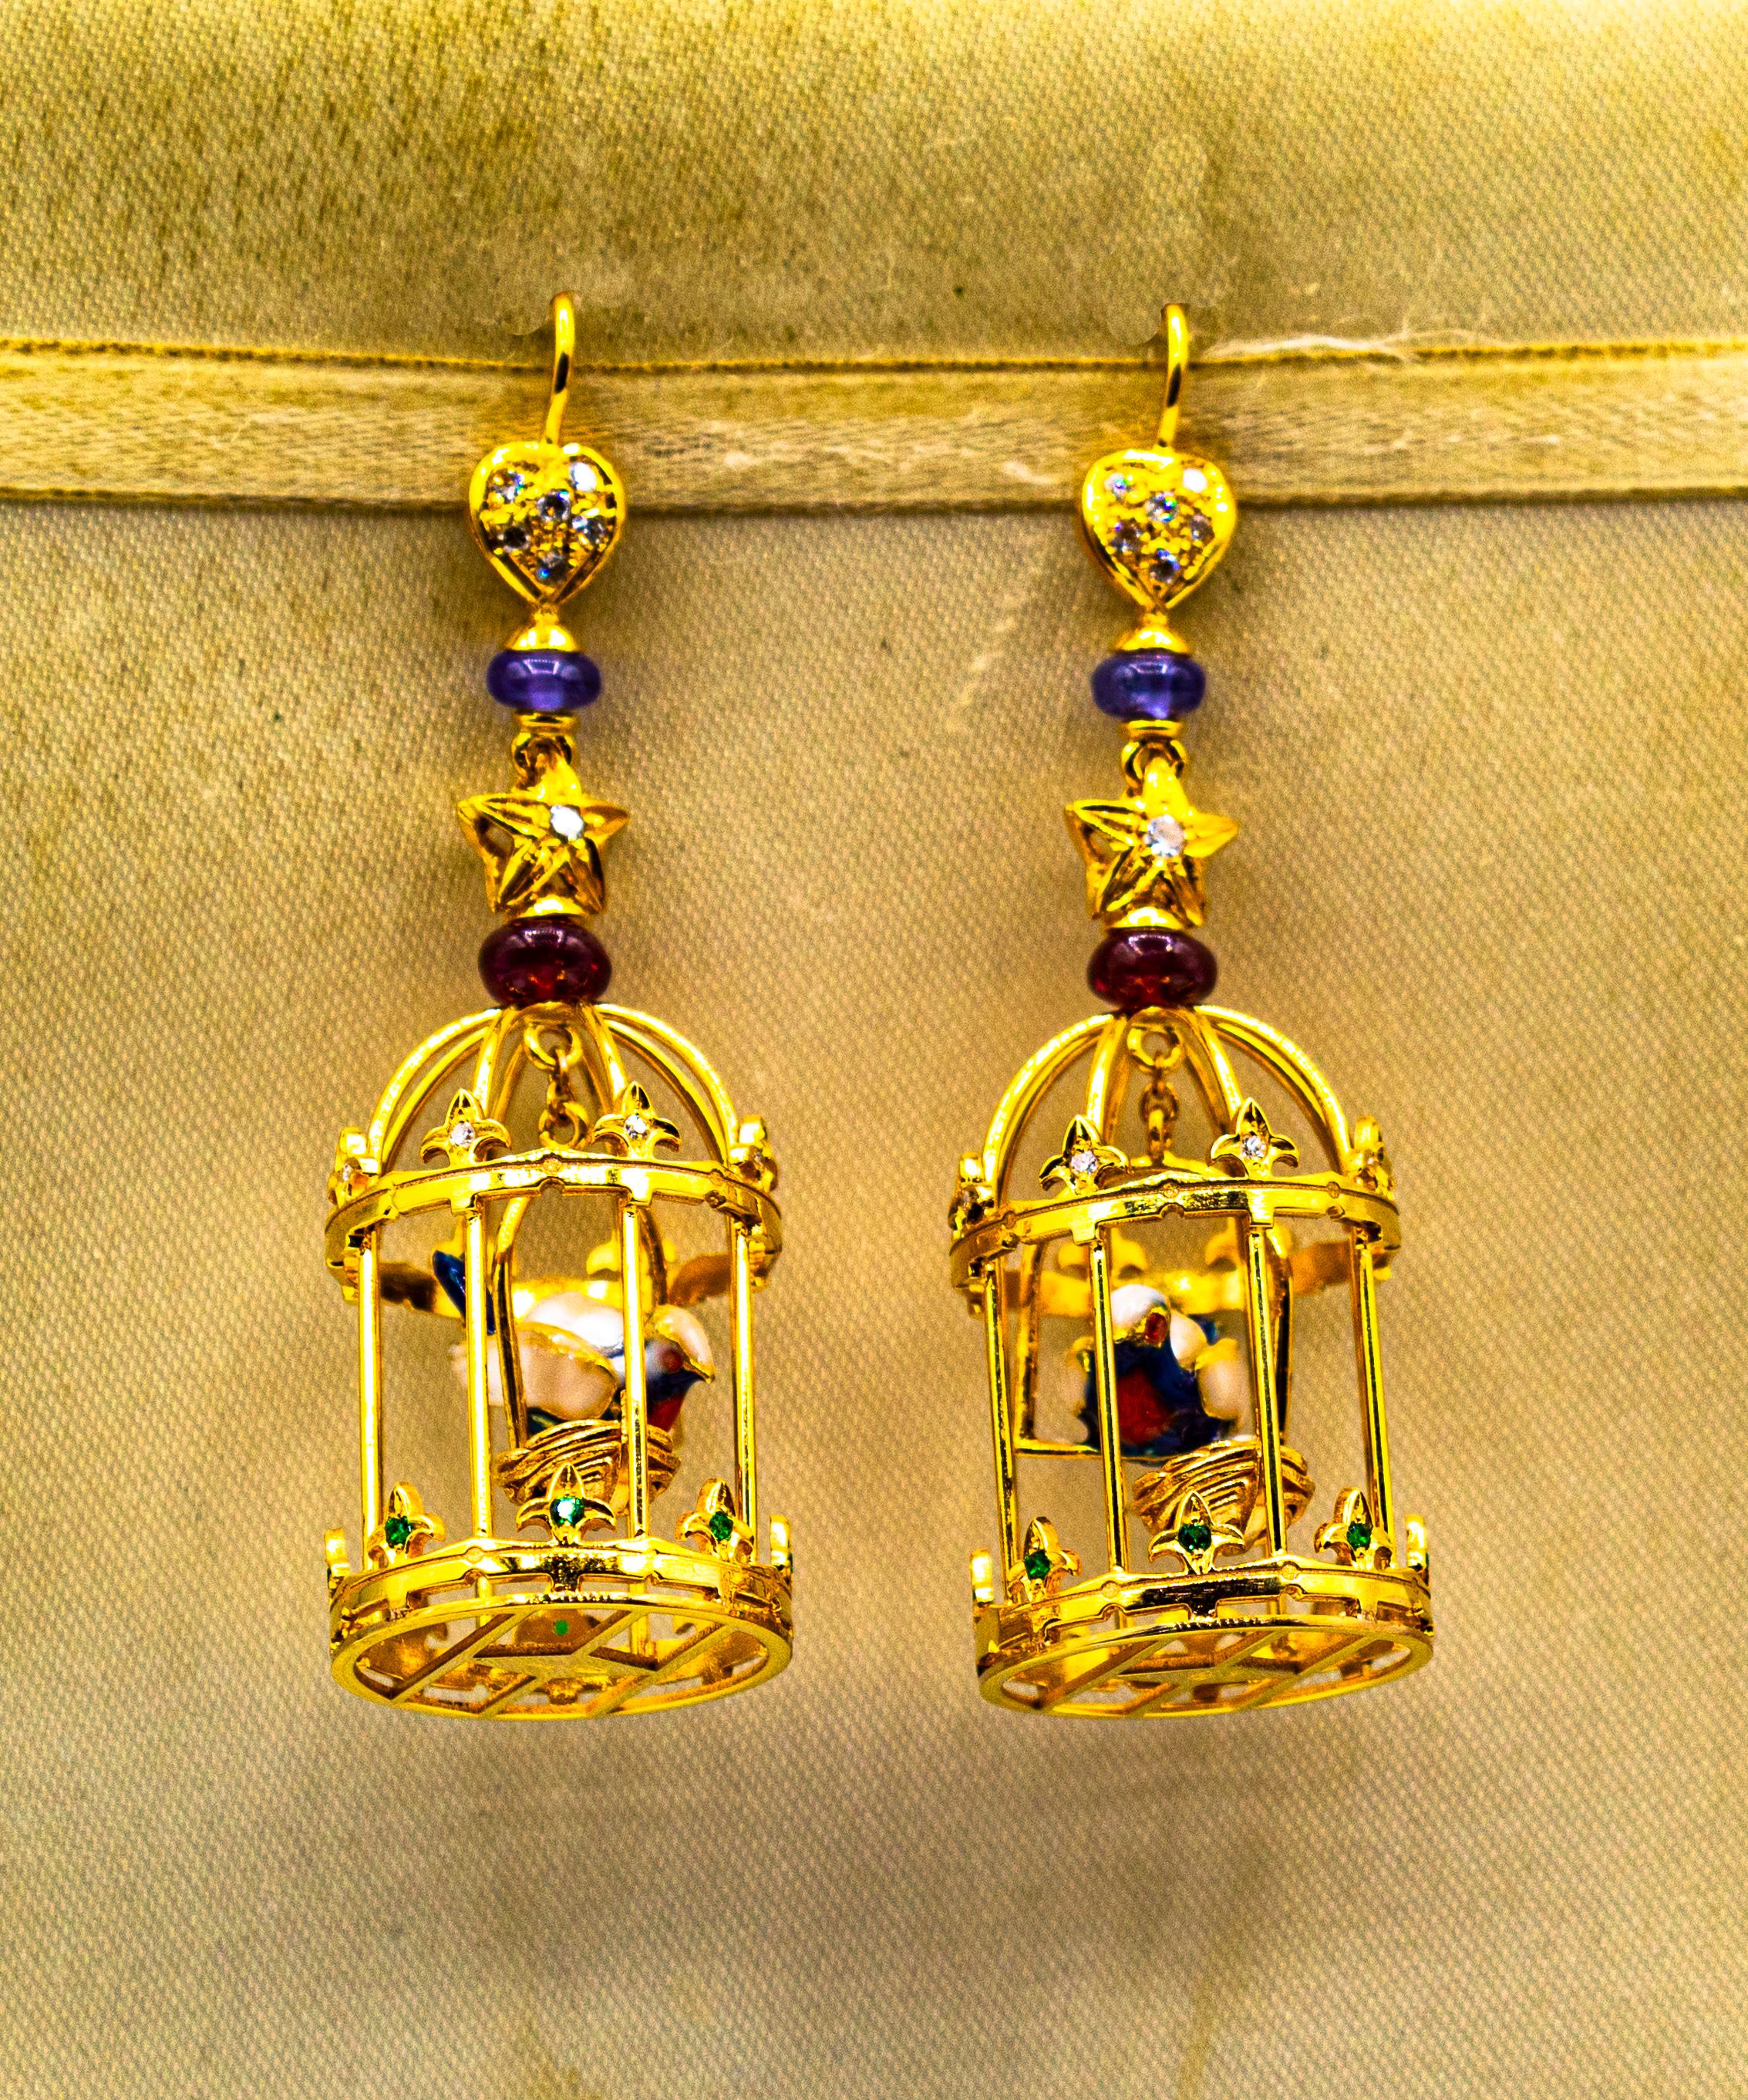 These Stud Earrings are made of 9K Yellow Gold.
These Earrings have 0.35 Carats of White Brilliant Cut Diamonds.
These Earrings have 0.50 Carats of Rubies.
These Earrings have 0.16 Carats of Tsavorite.
These Earrings have Tanzanite.
These Earrings